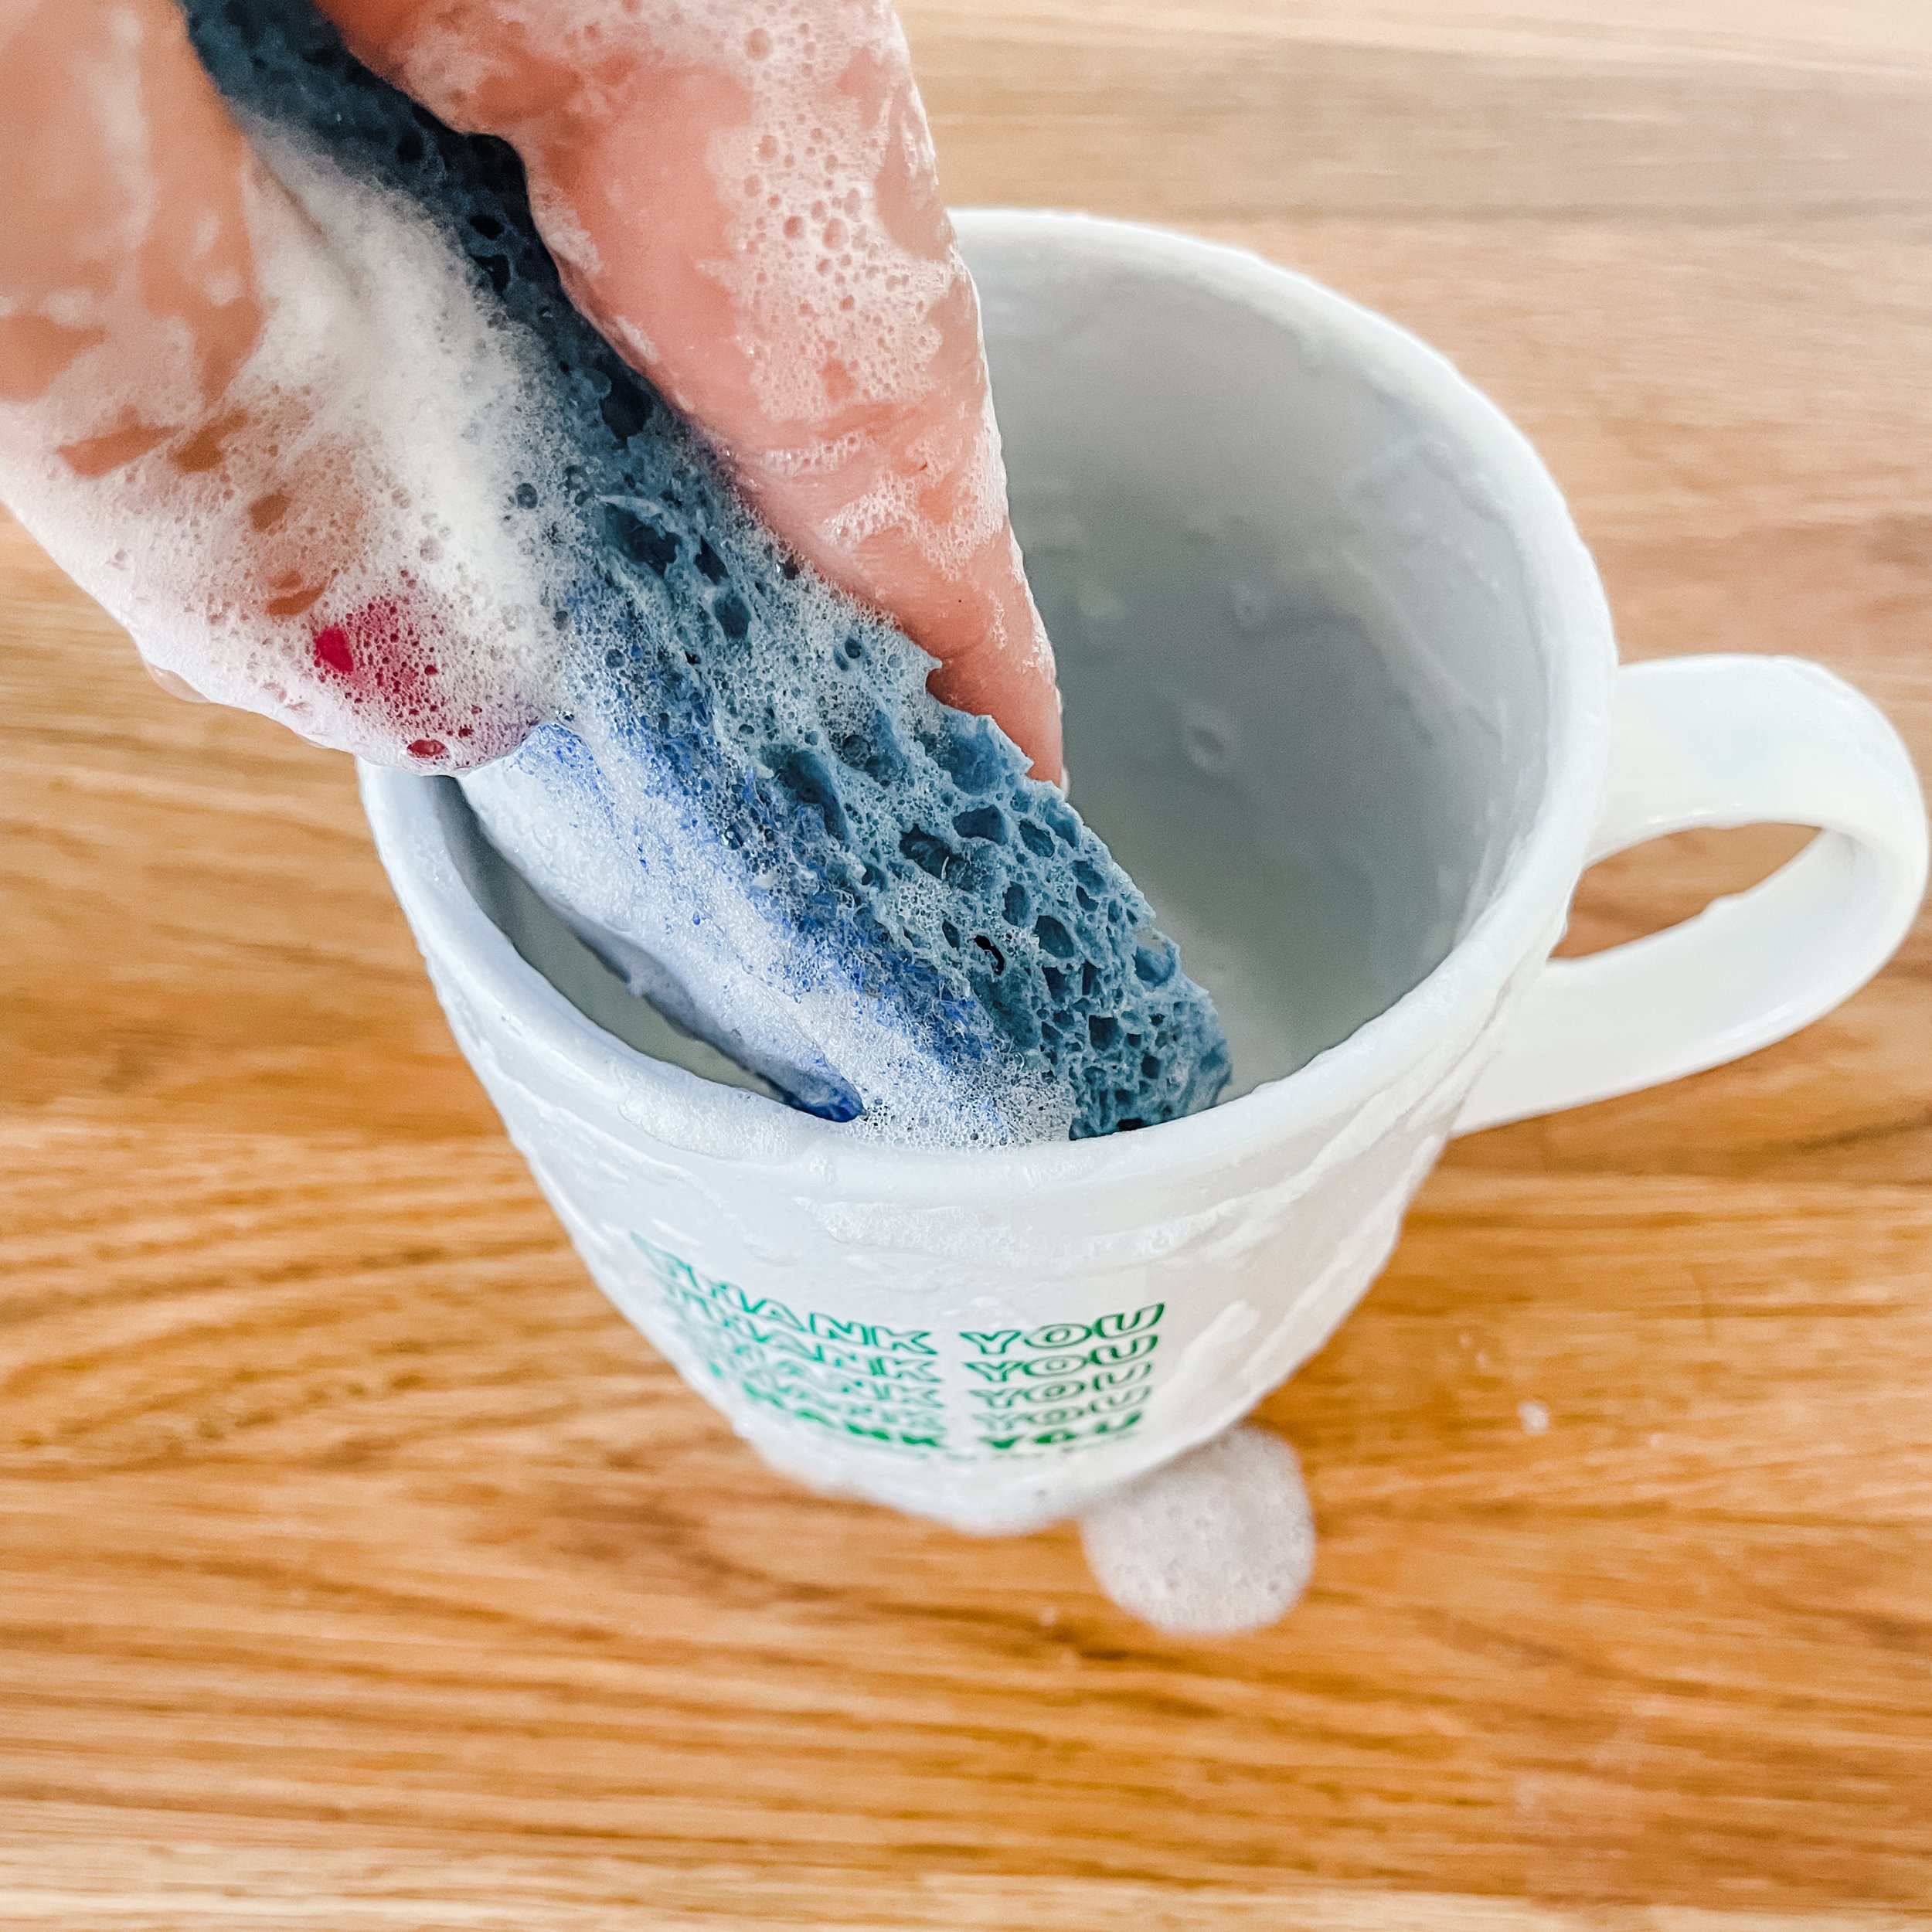 Cleaning stained mugs - coffee, tea, and cutlery scuffs easily